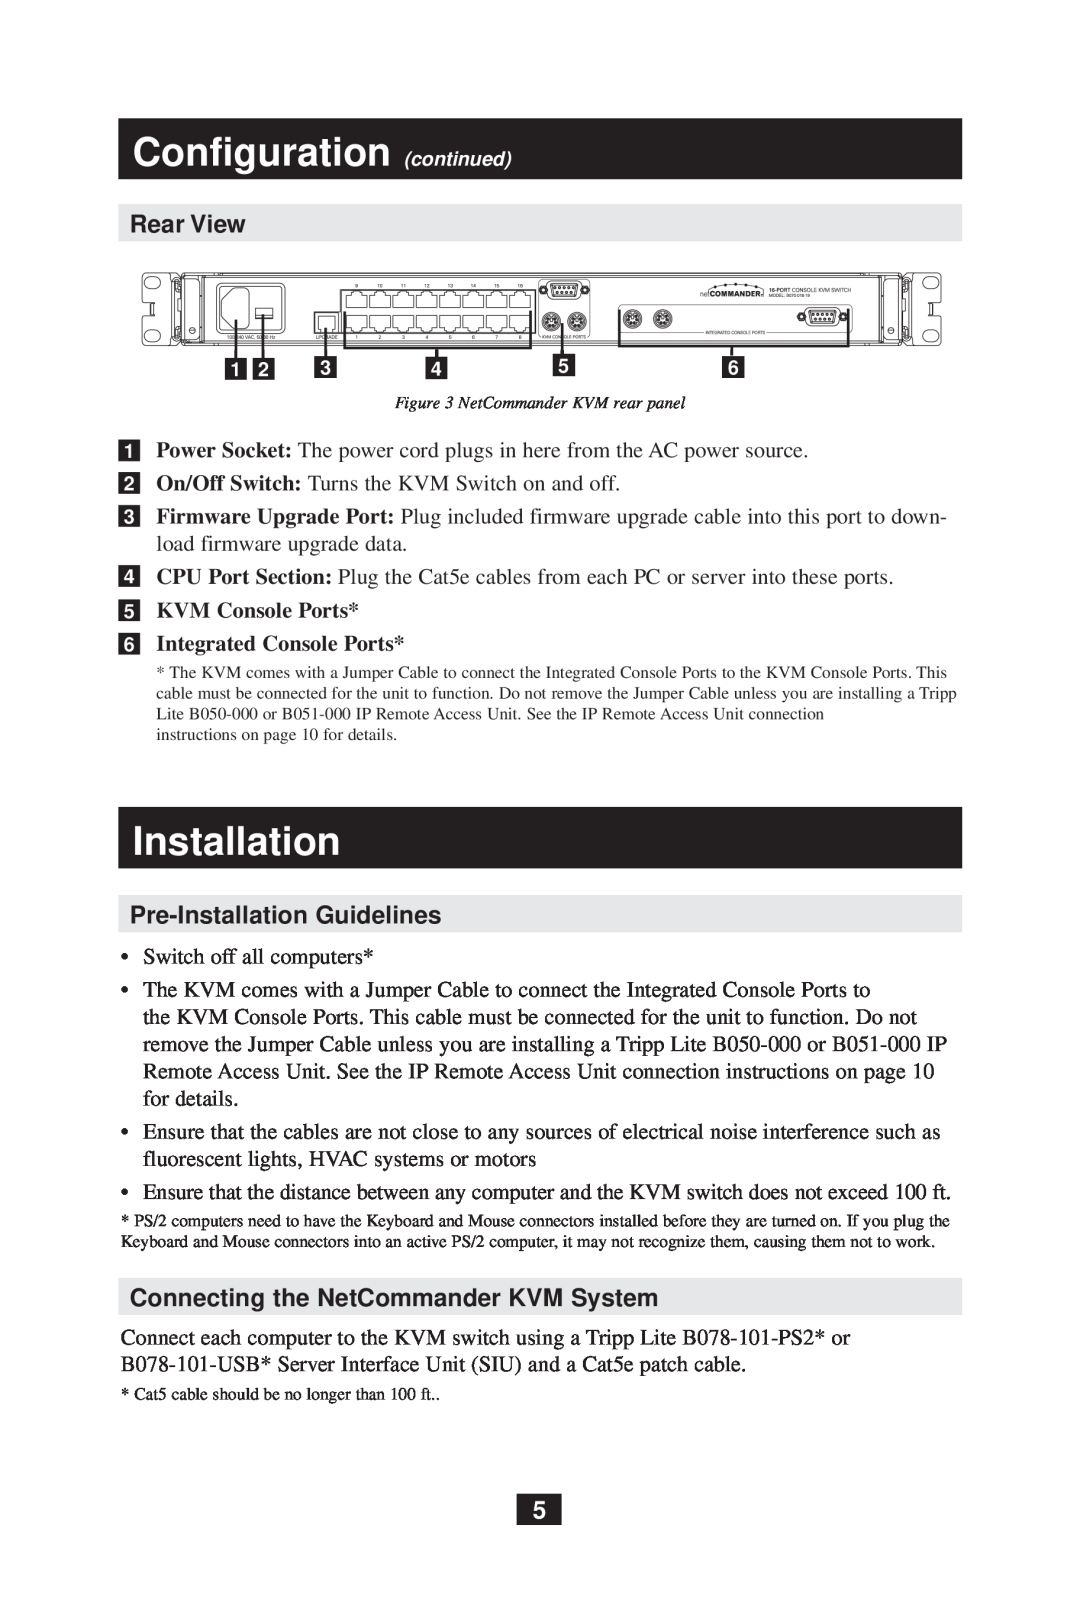 Tripp Lite B070-008-19 owner manual Configuration continued, Rear View, Pre-Installation Guidelines 